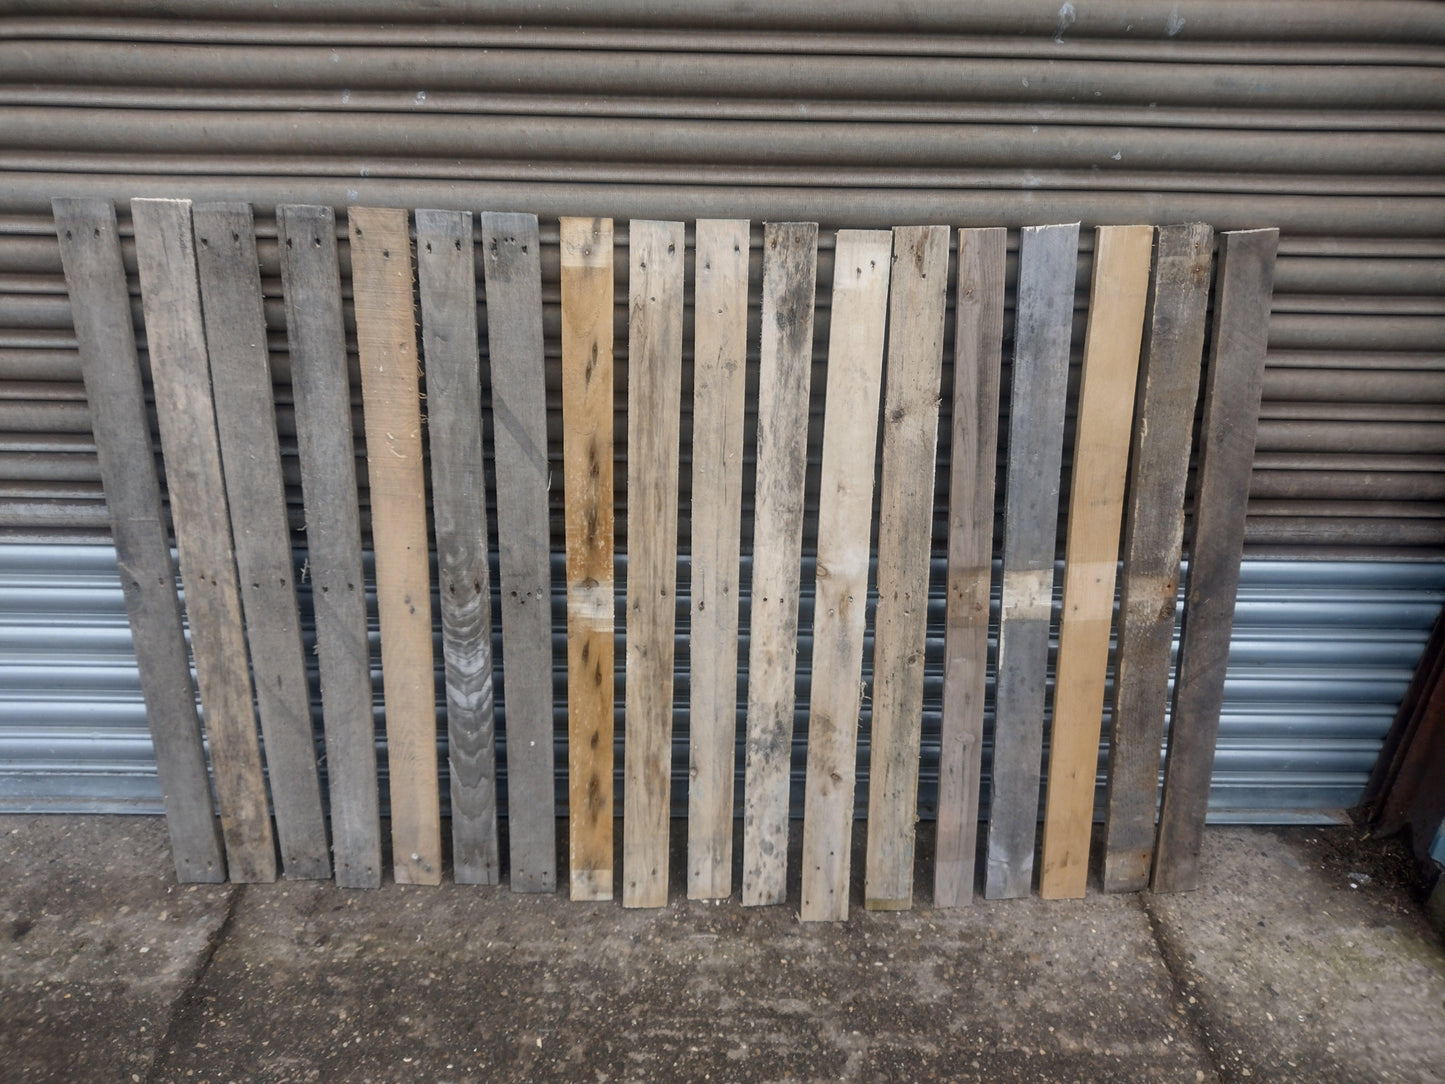 Reclaimed Distressed Wood Pallet Planks - Pack of 30 - Natural Patina - Easy Cladding - Multiple Project Uses - Anpio woods ltd